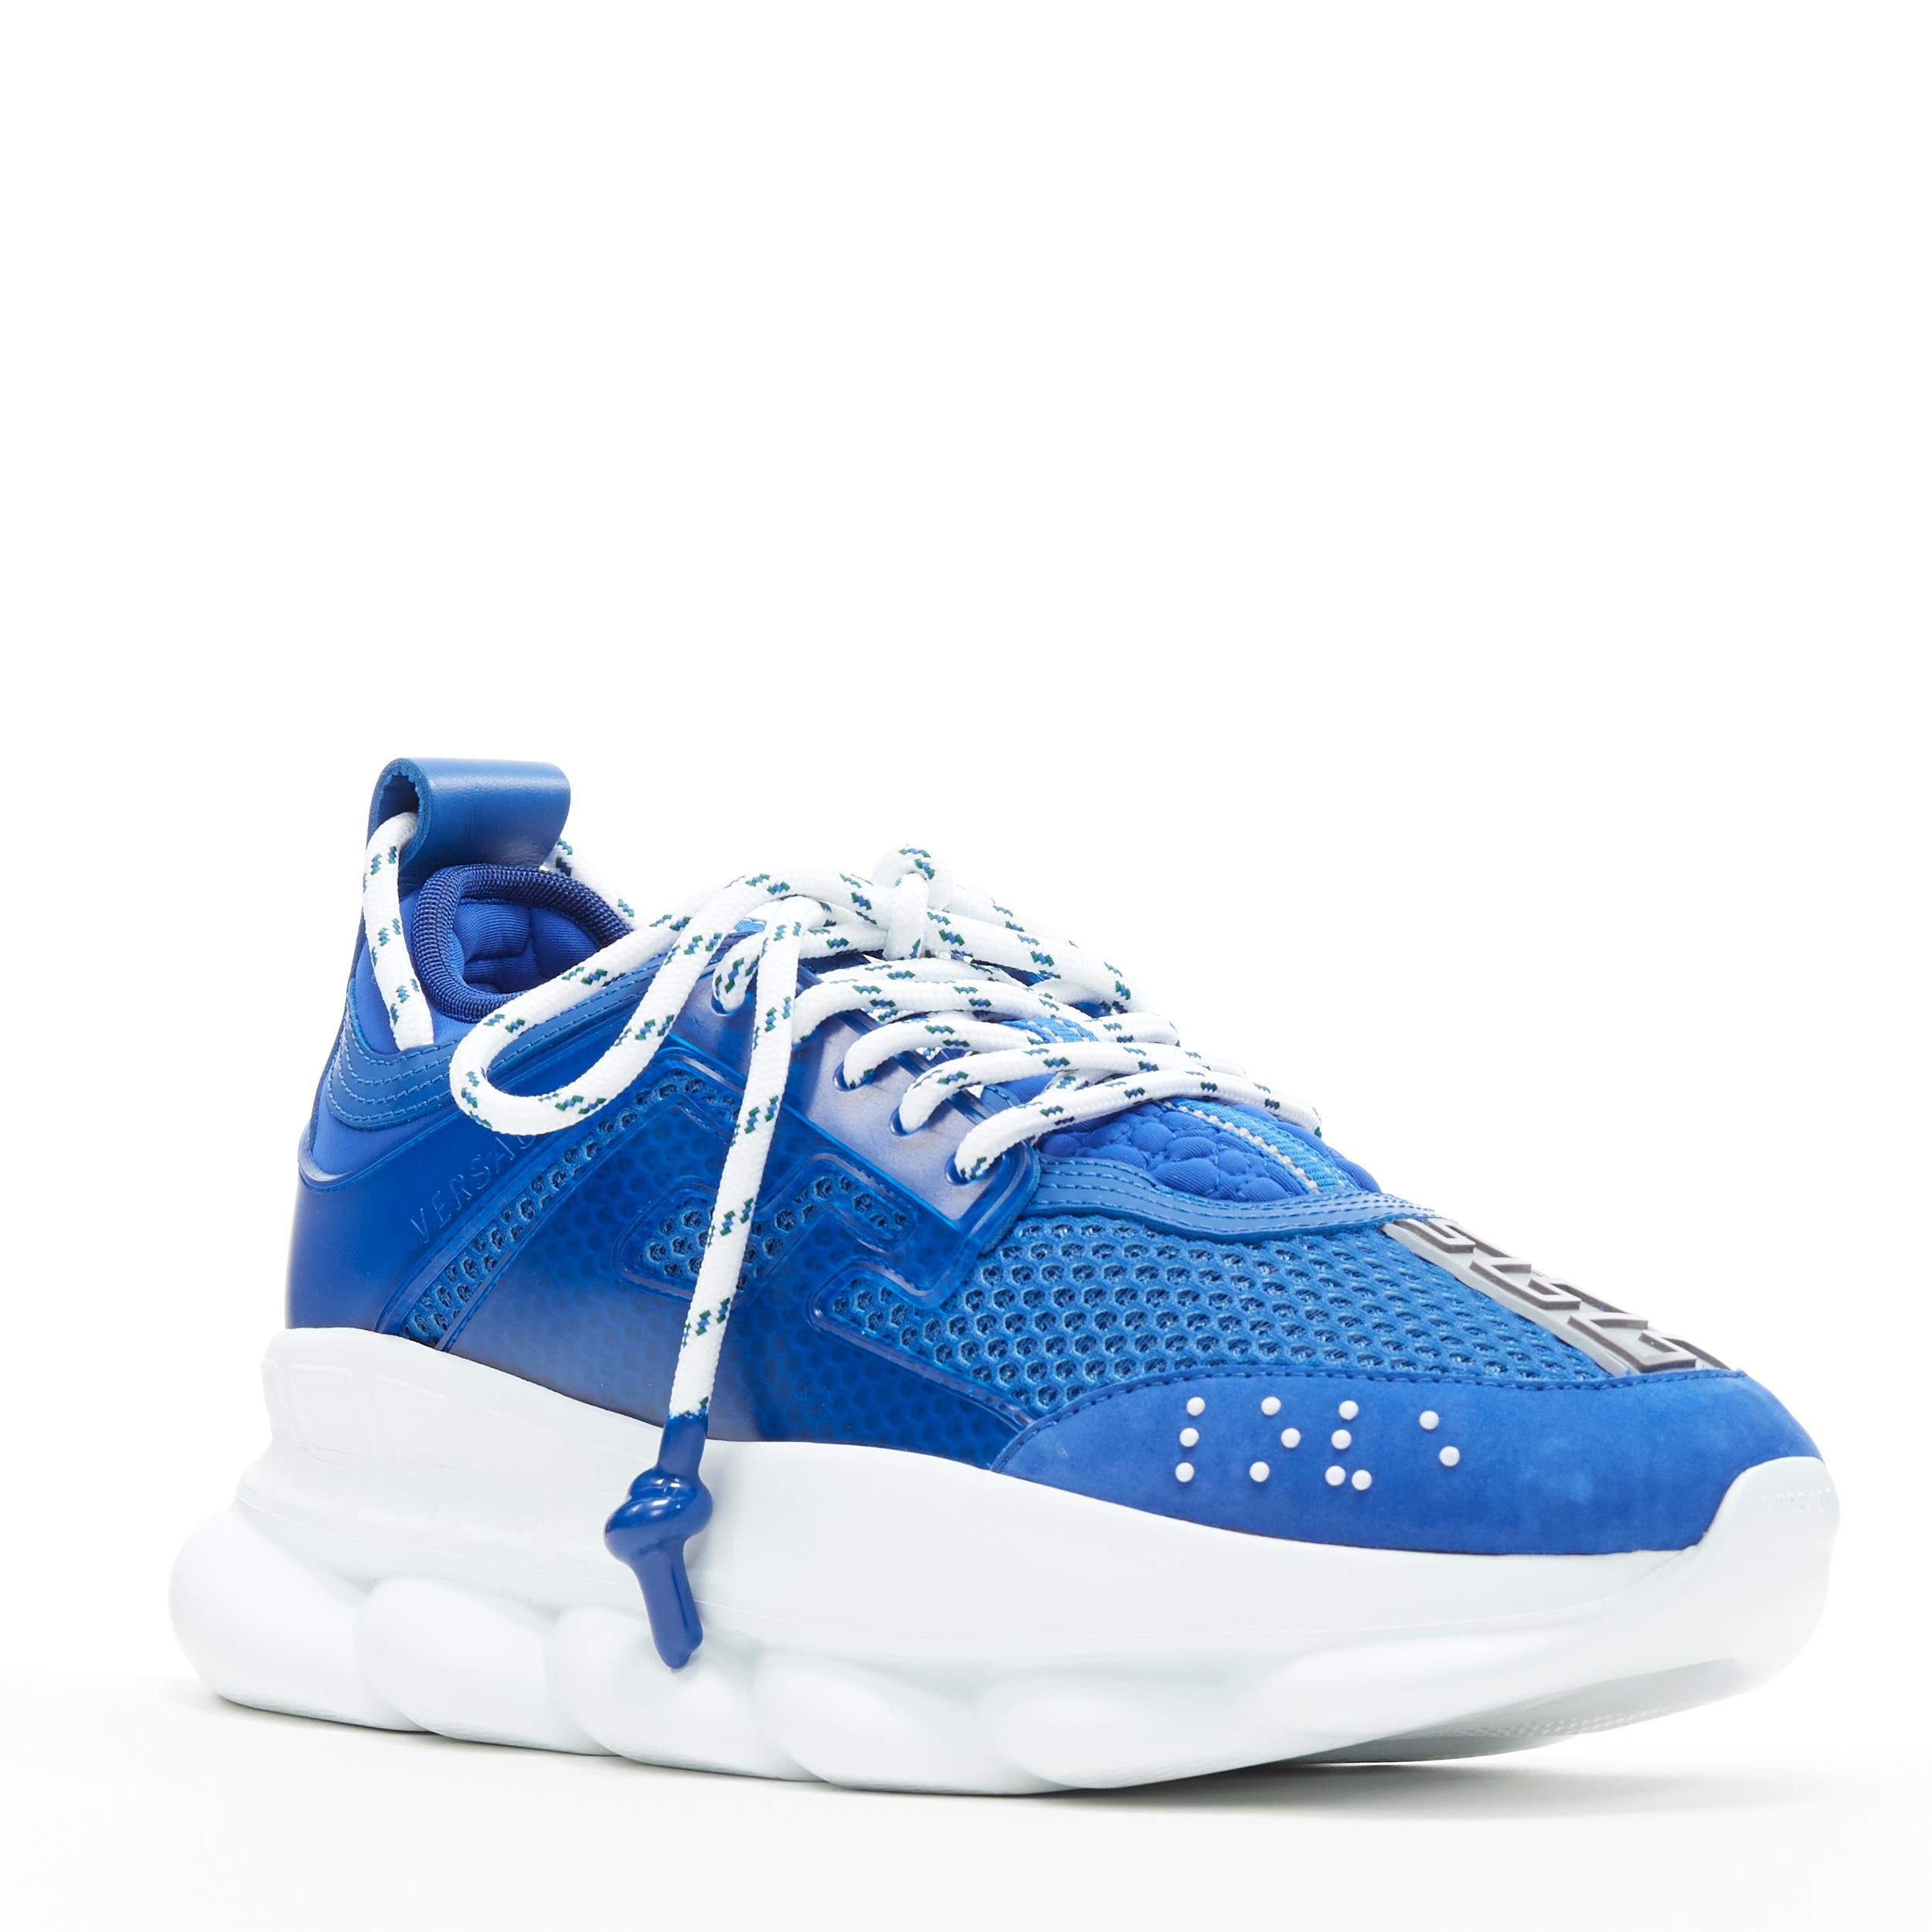 new VERSACE Chain Reaction Bluette 2 white mesh suede chunky sneaker EU38 US5 
Reference: TGAS/A06309 
Brand: Versace 
Designer: Salehe Bembury 
Model: Chain Reaction Bluette 2 
Material: Leather 
Color: Blue 
Pattern: Solid 
Closure: Lace up 
Extra